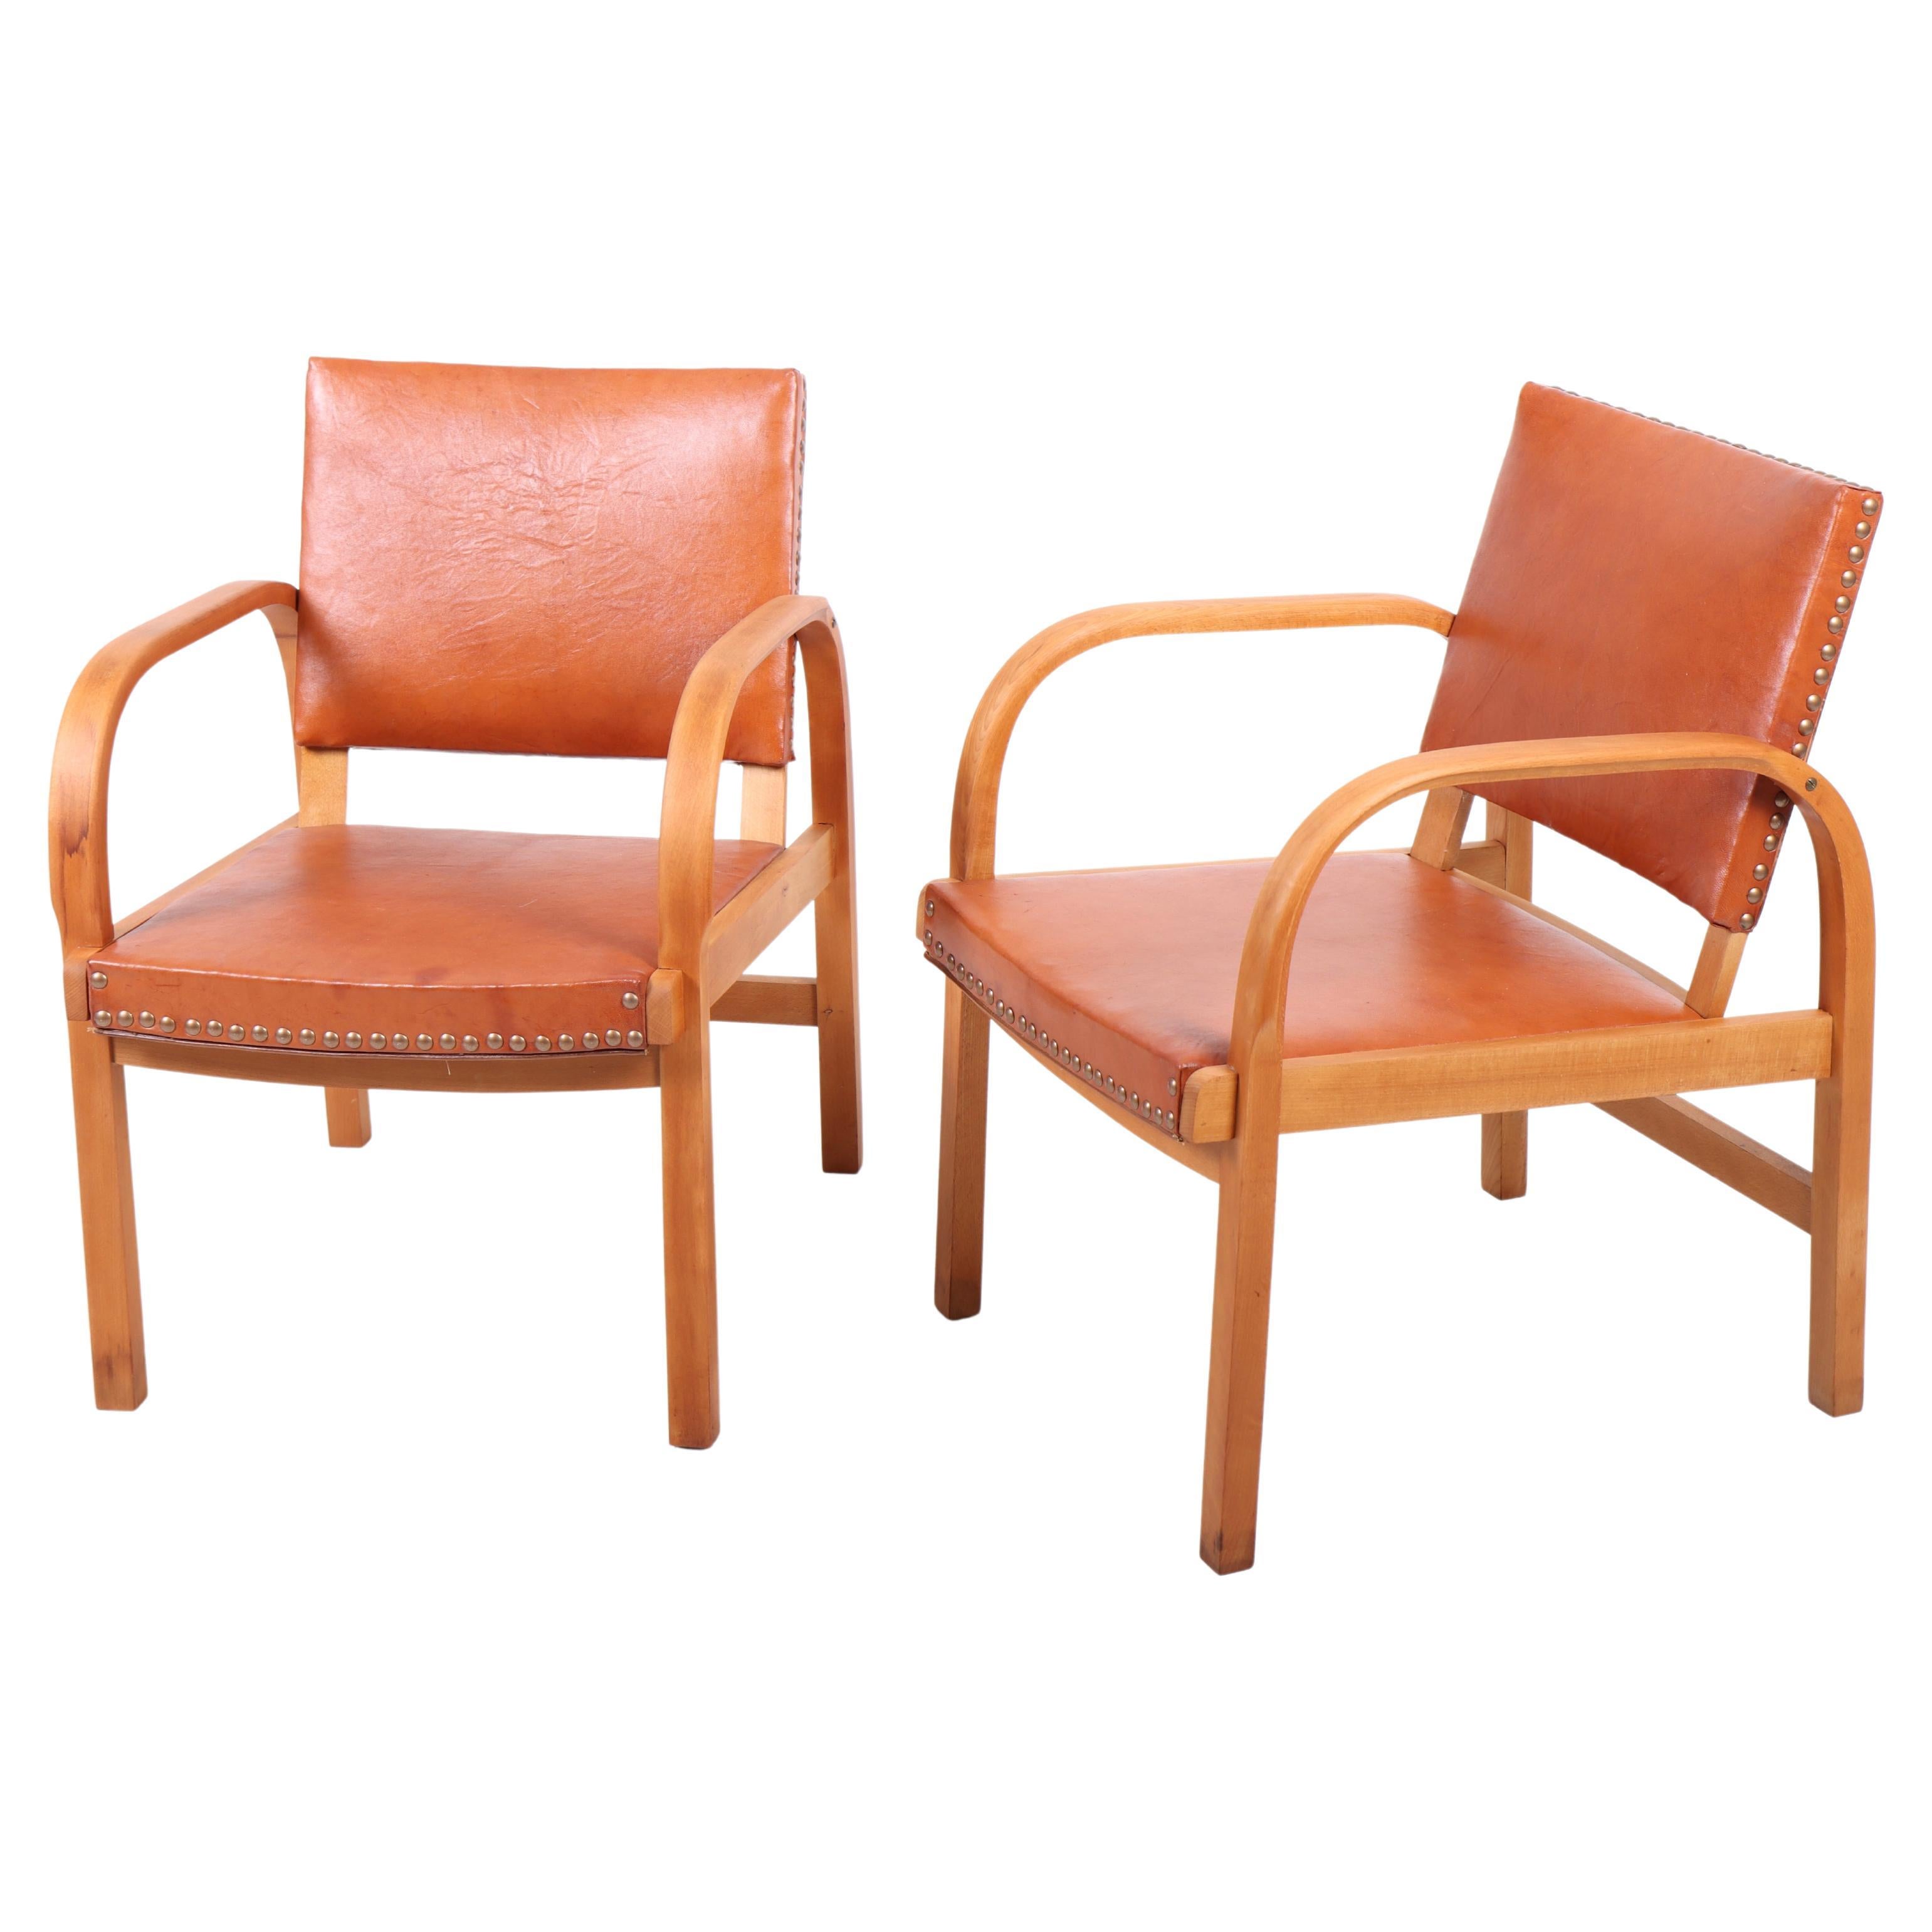 Pair of Danish Lounge Chairs by Magnus L. Stephensen, 1940s For Sale